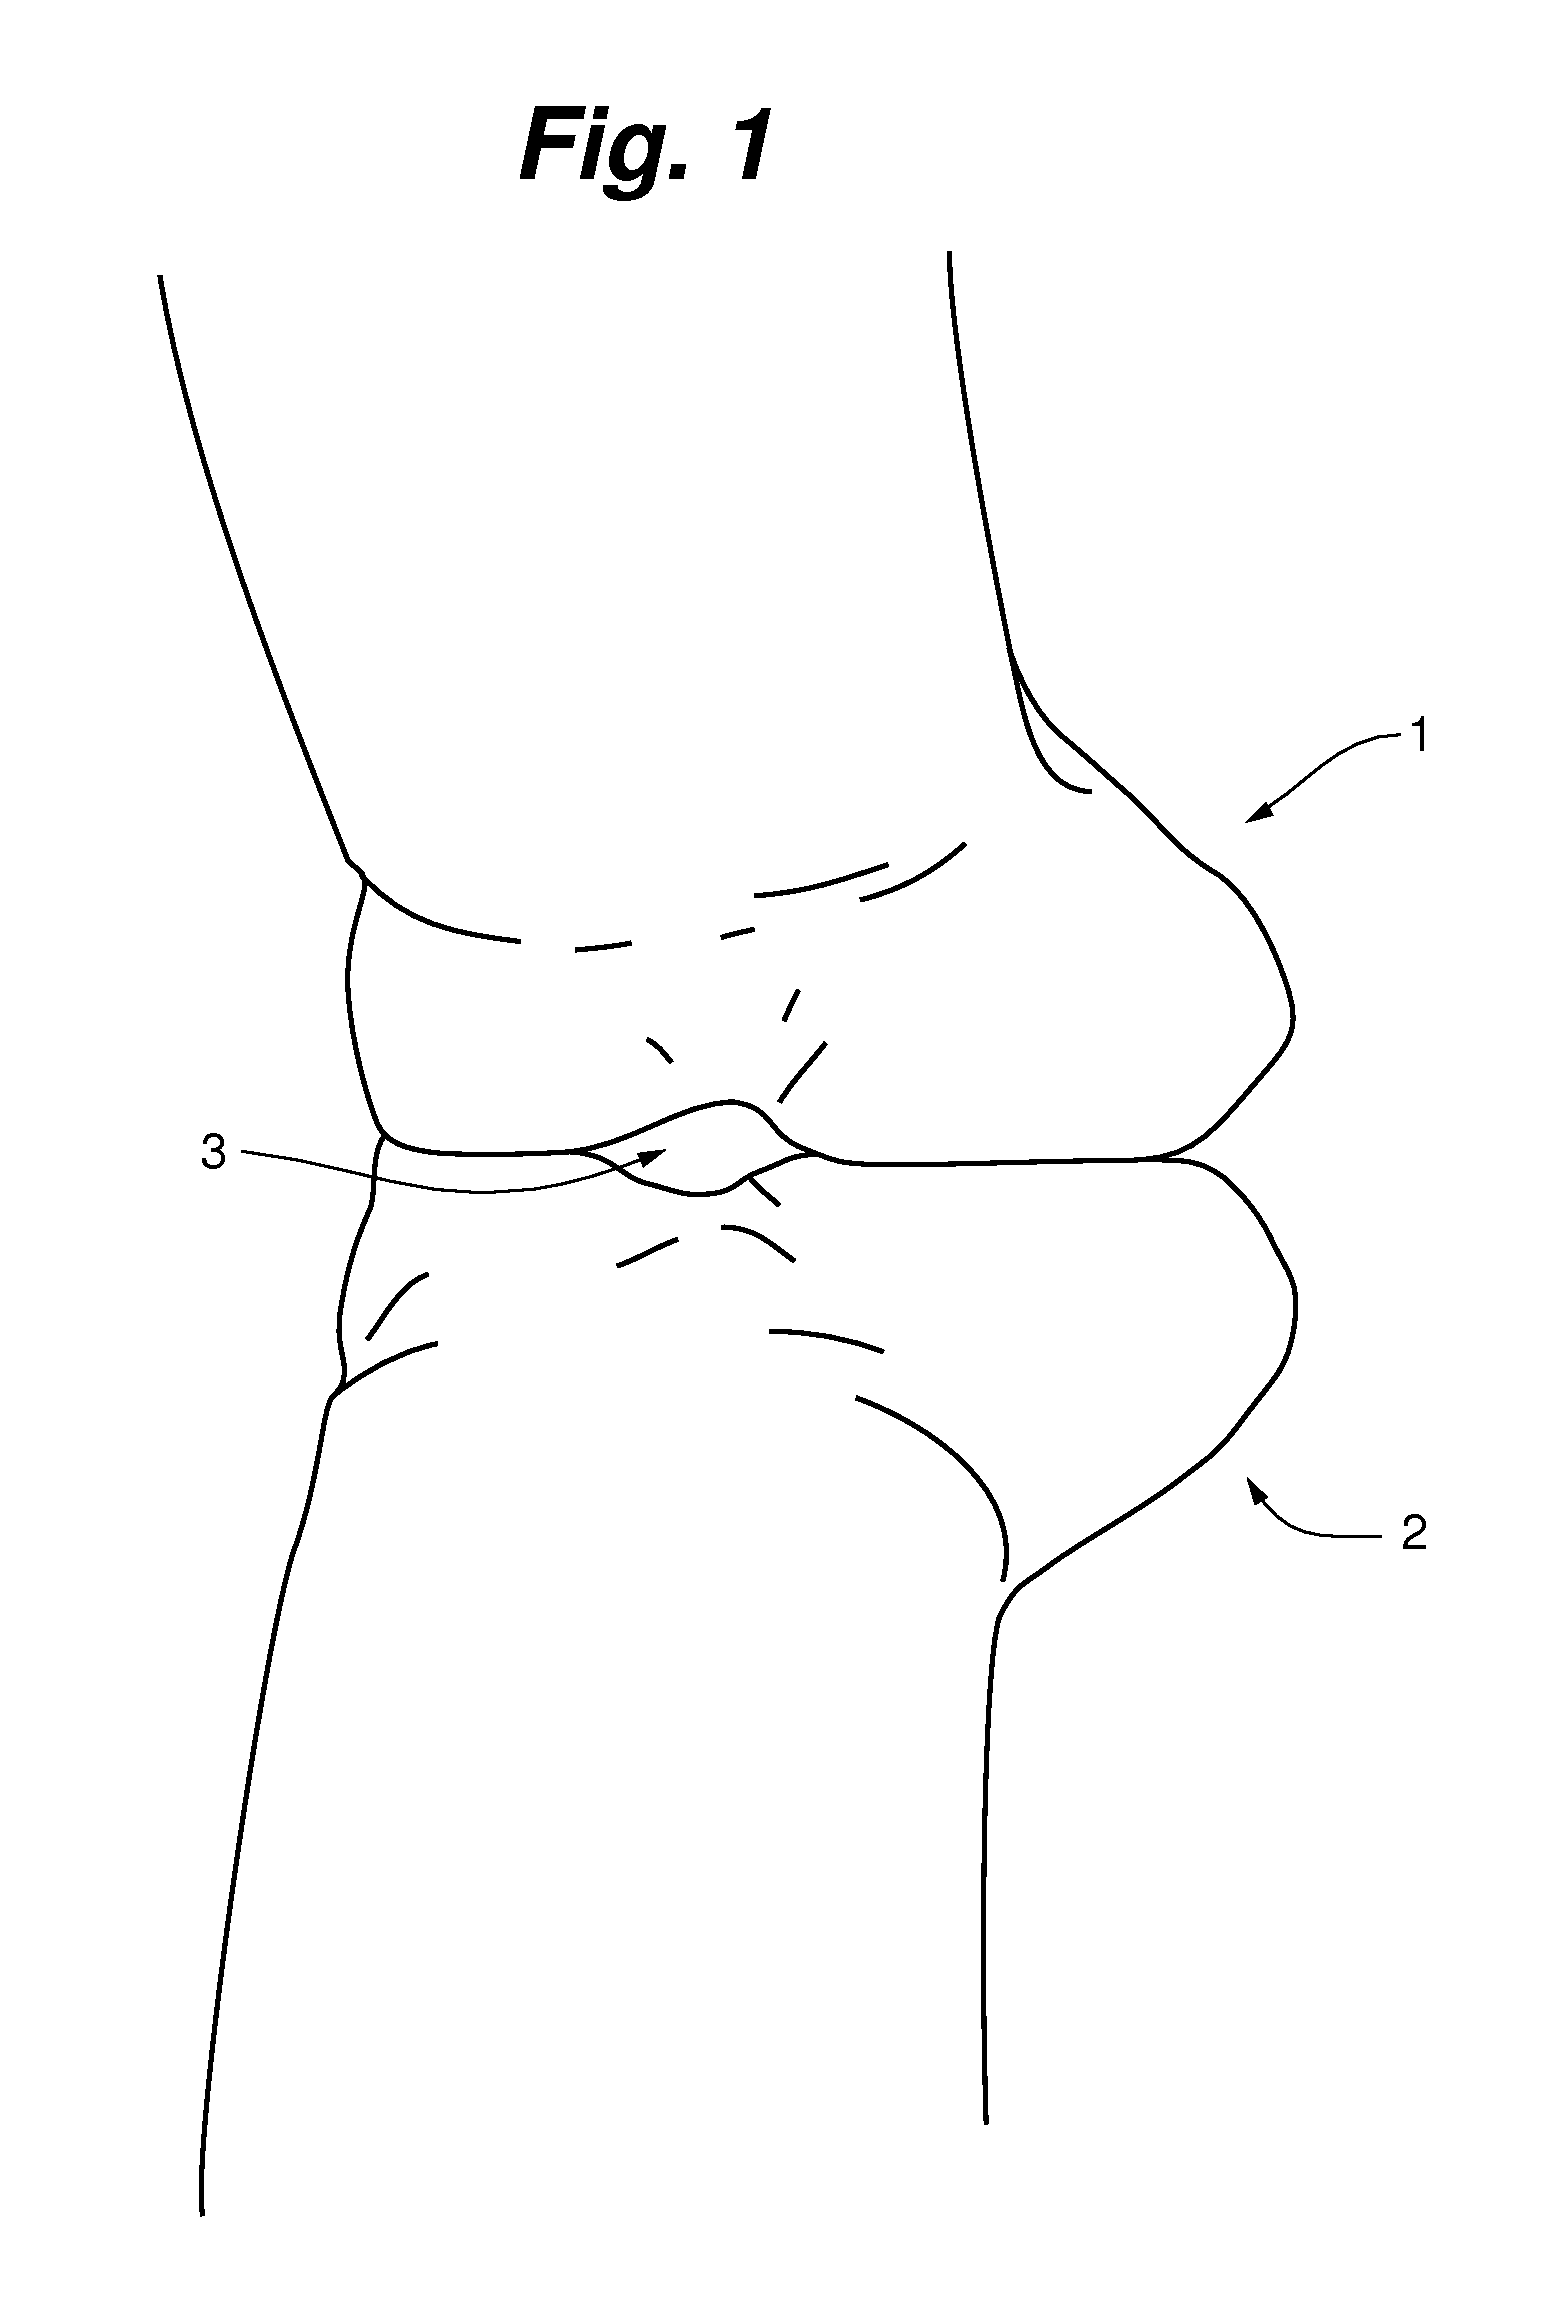 Computer mouse accoutrement (attachment) and method of preventing or alleviating carpel tunnel syndrome (CTS)